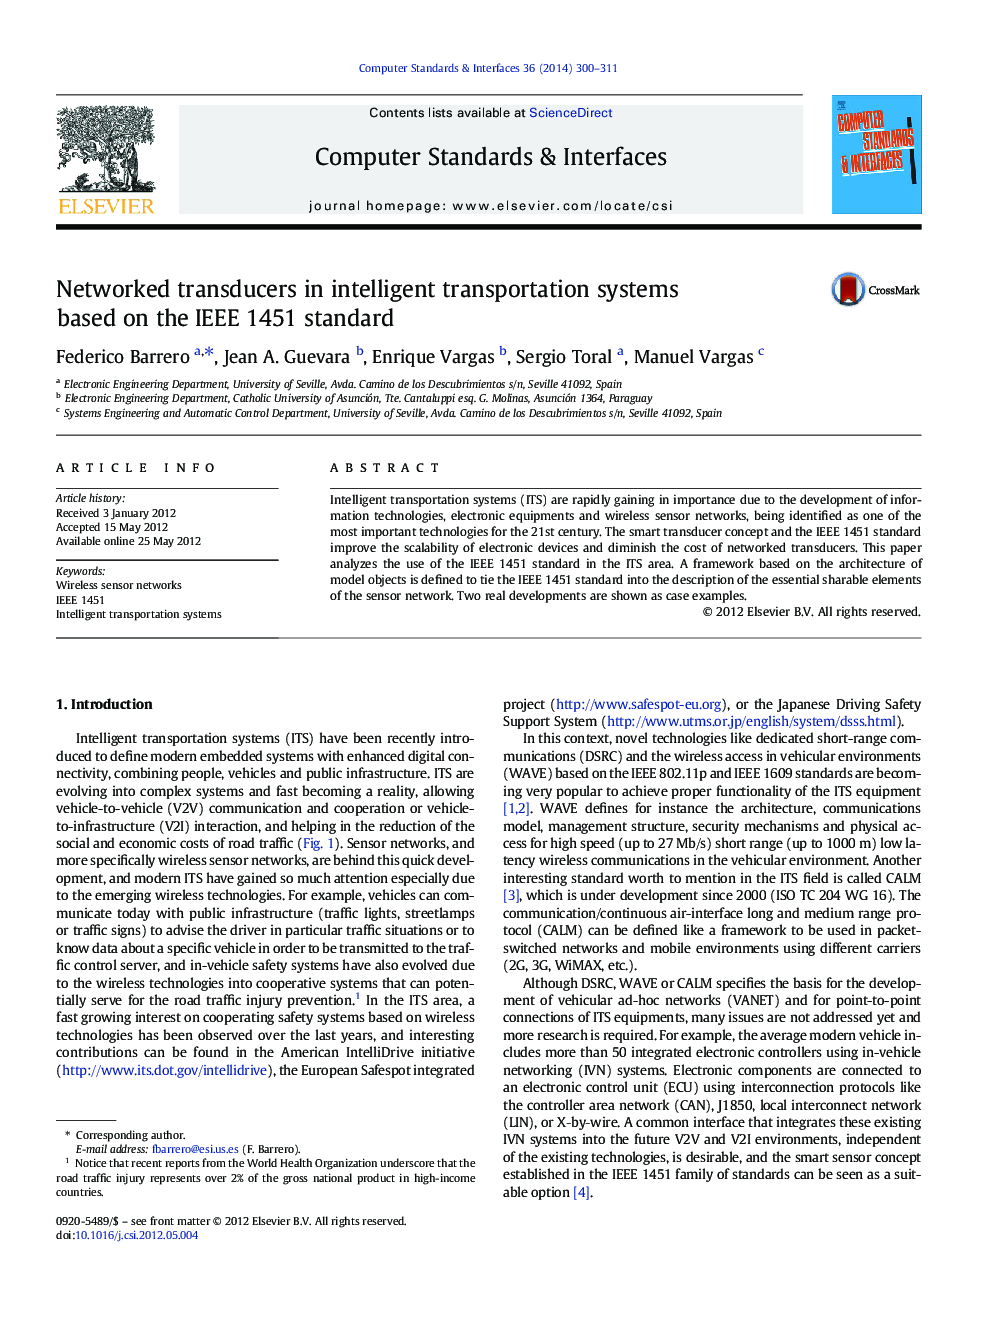 Networked transducers in intelligent transportation systems based on the IEEE 1451 standard